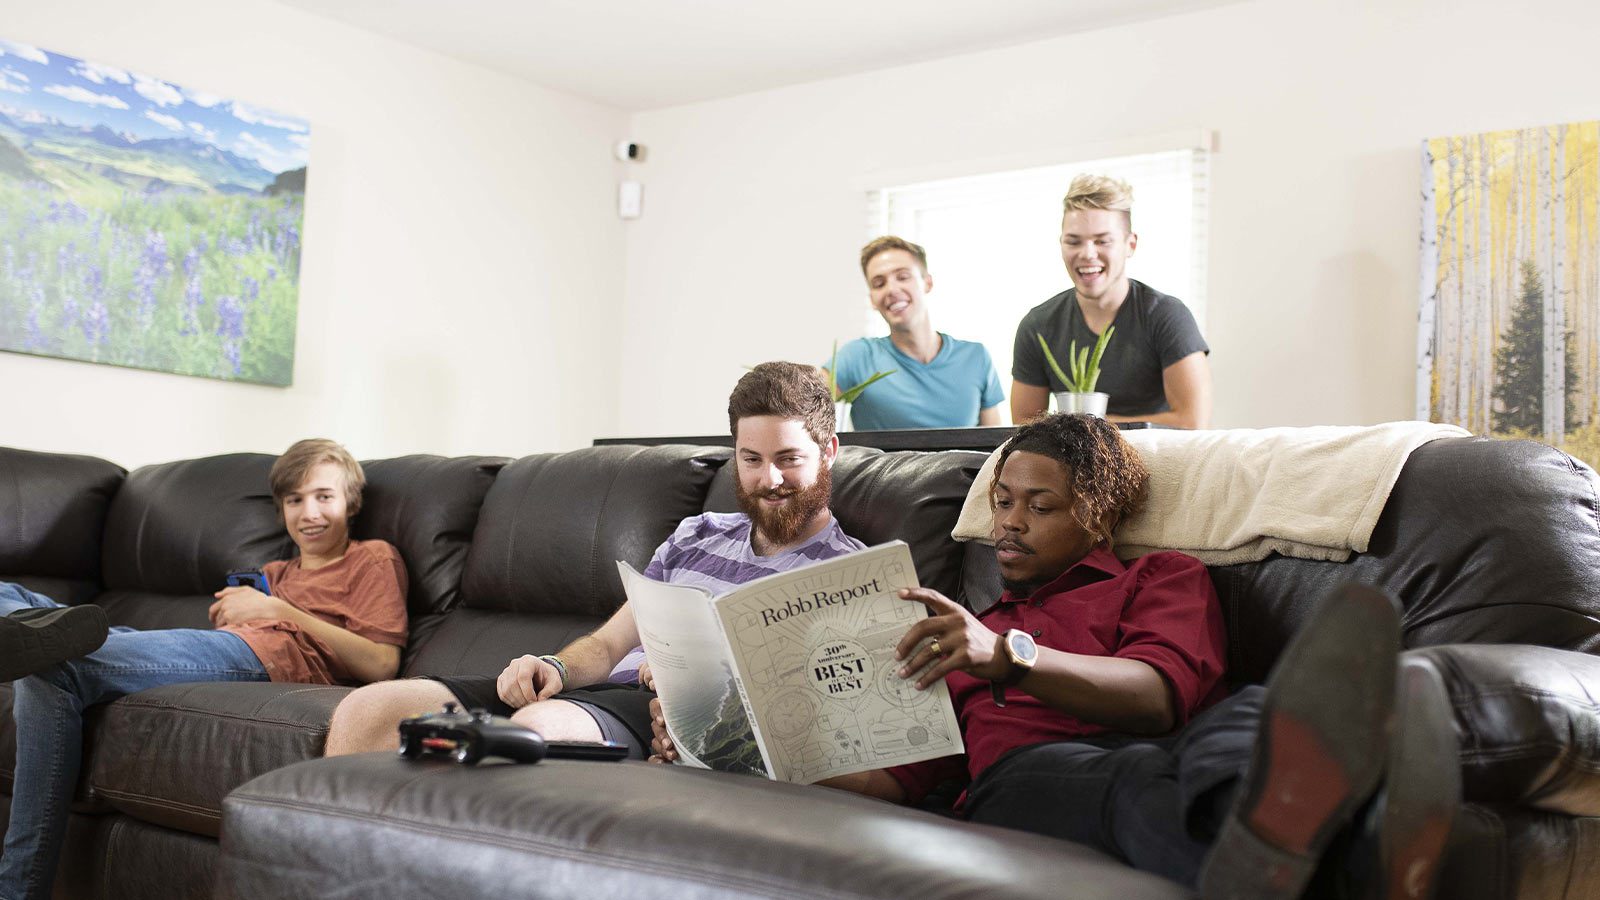 A group of men lounging on a couch, reading a newspaper and enjoying each other's company.